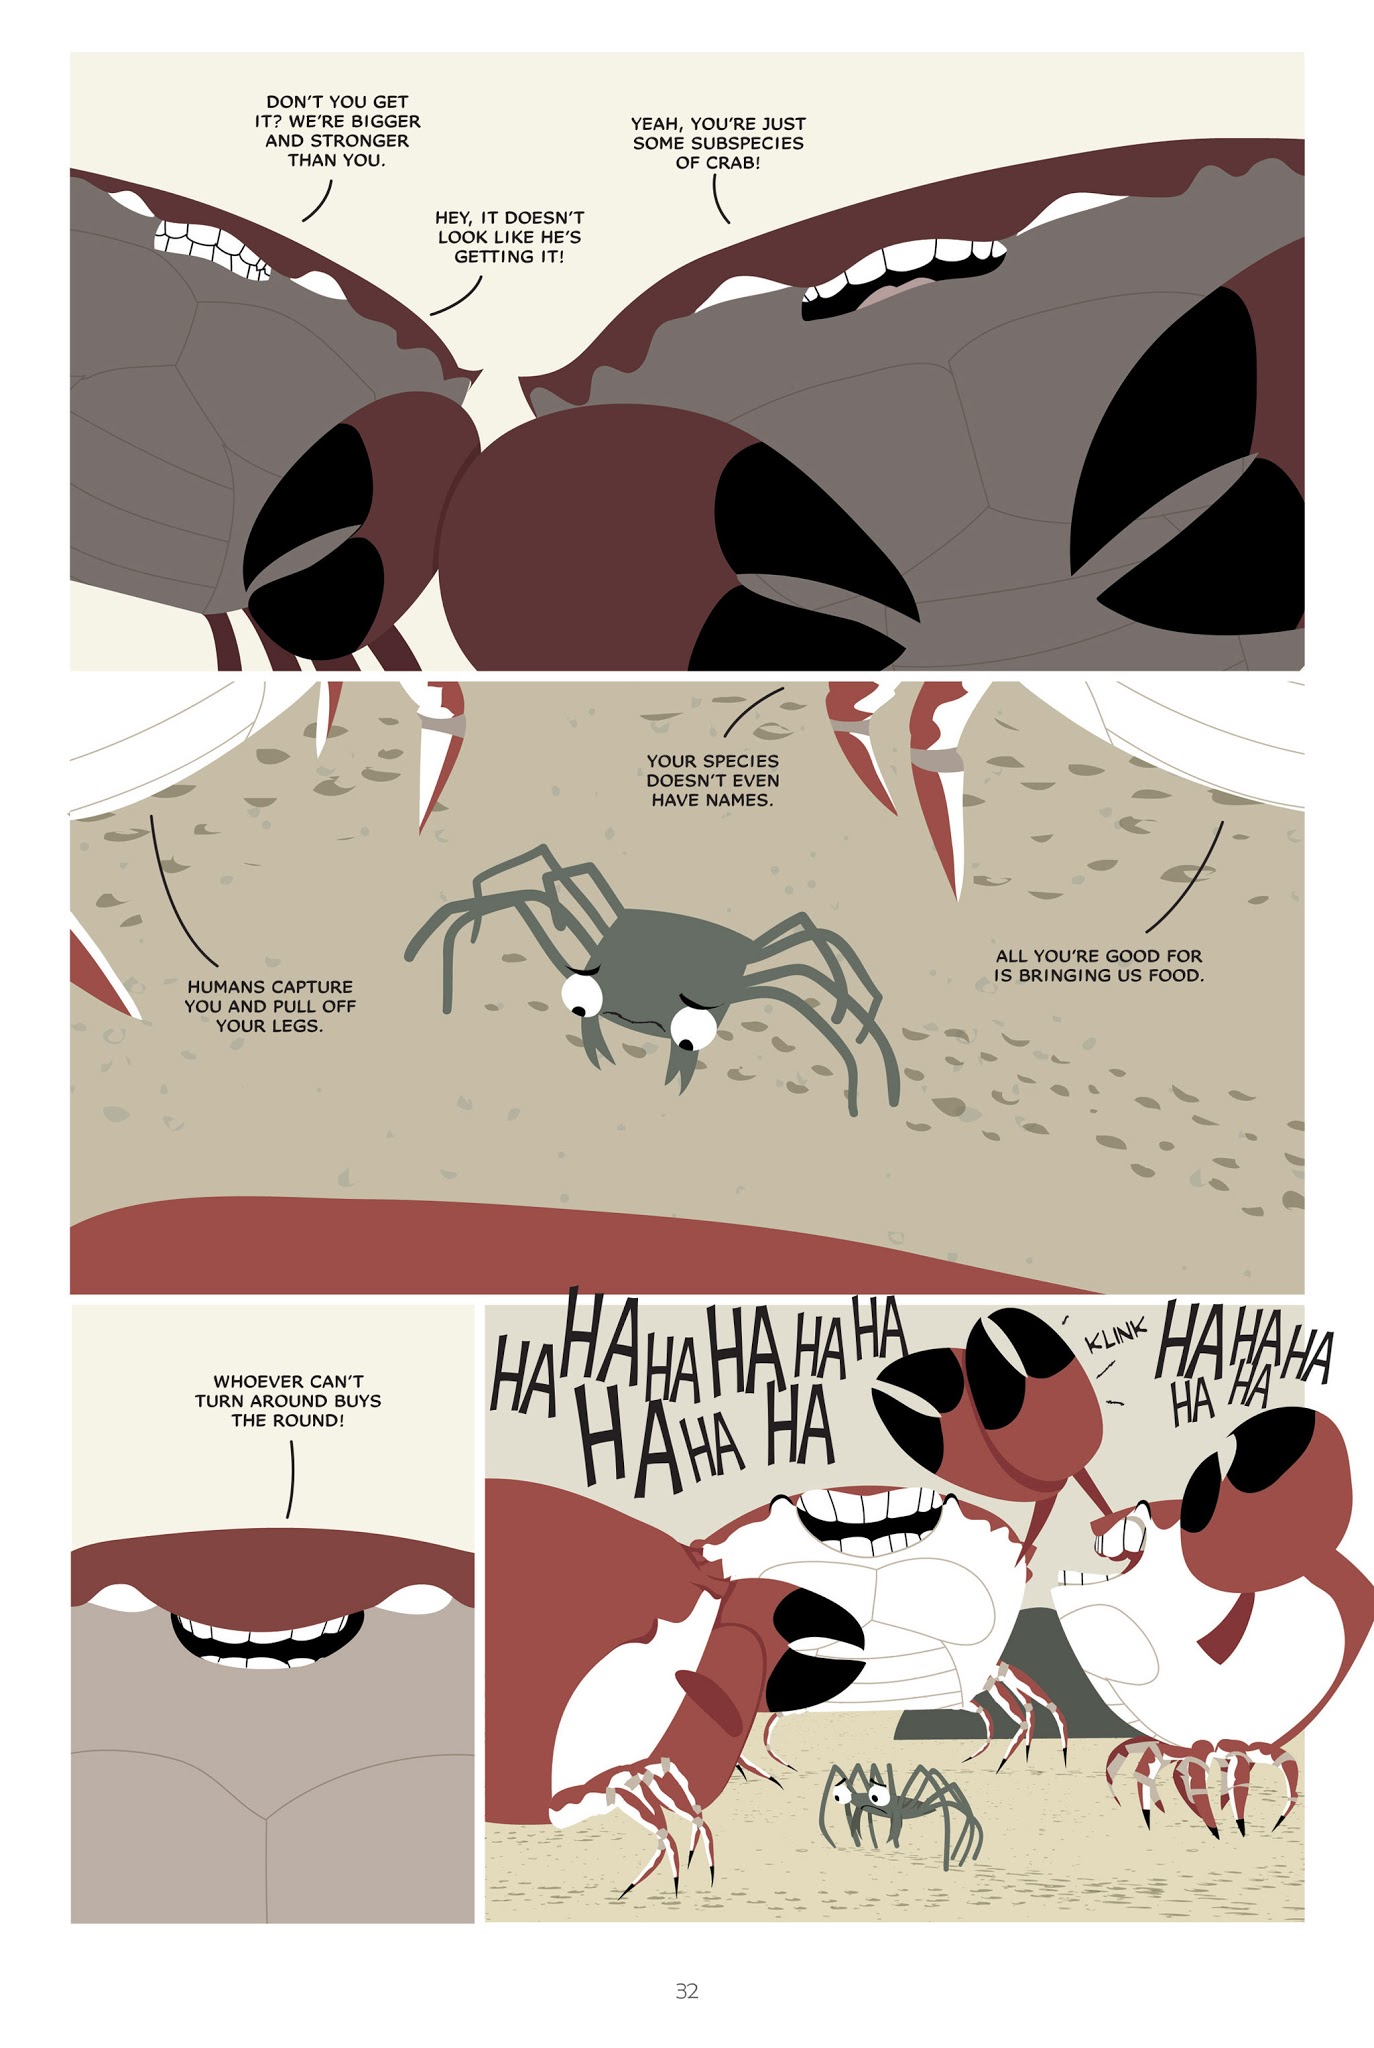 Read online The March of the Crabs comic -  Issue # TPB 1 - 35